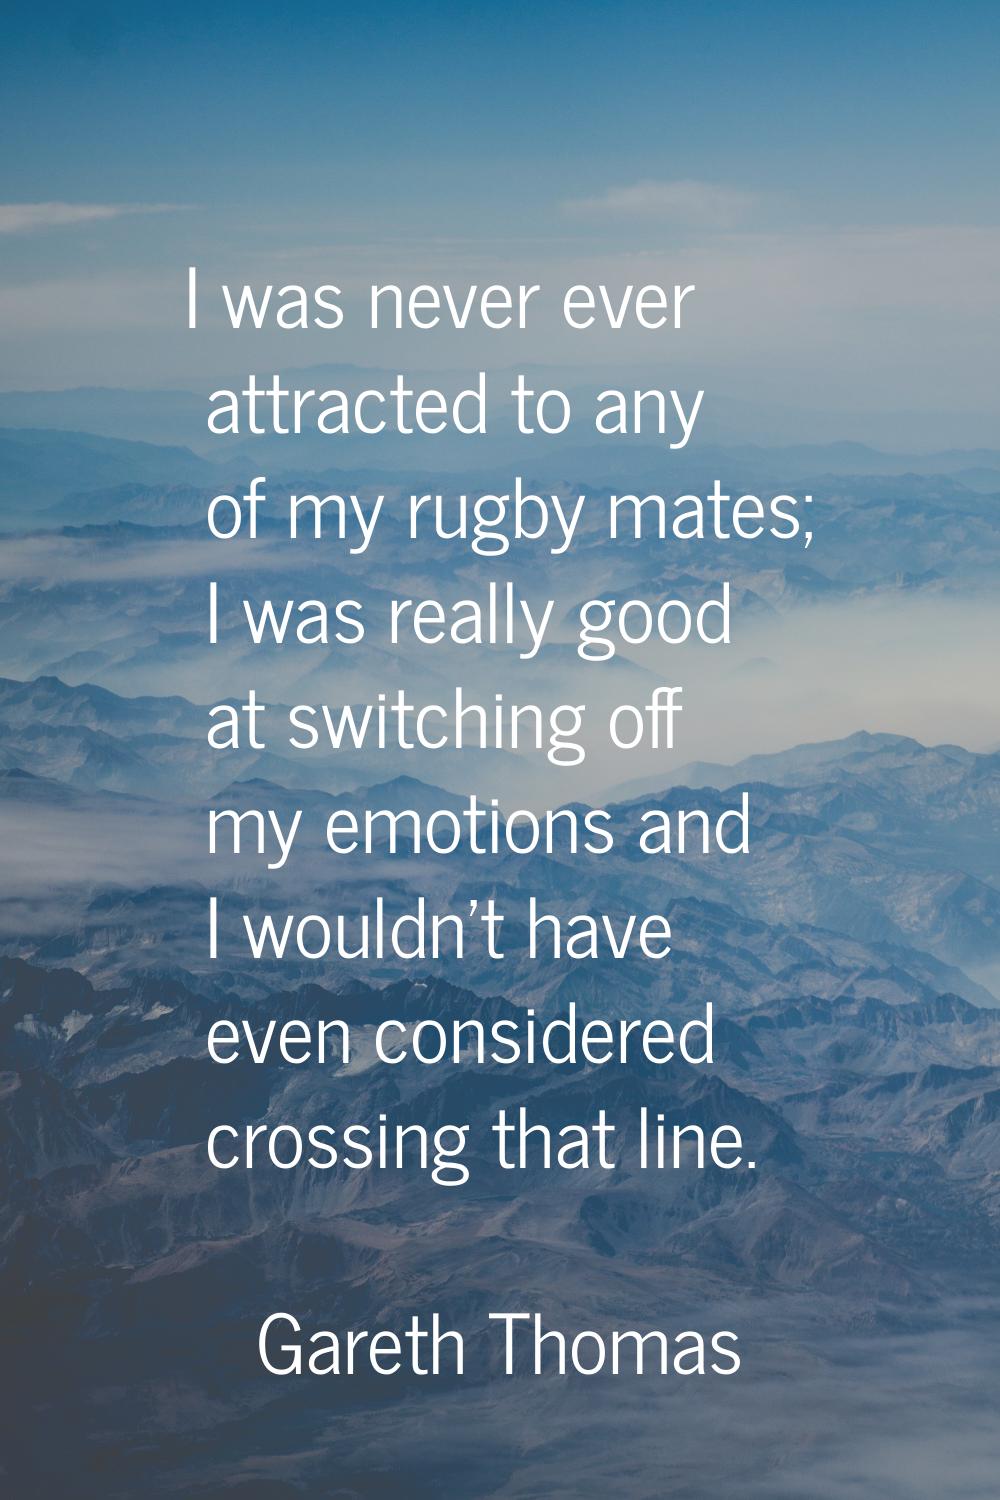 I was never ever attracted to any of my rugby mates; I was really good at switching off my emotions